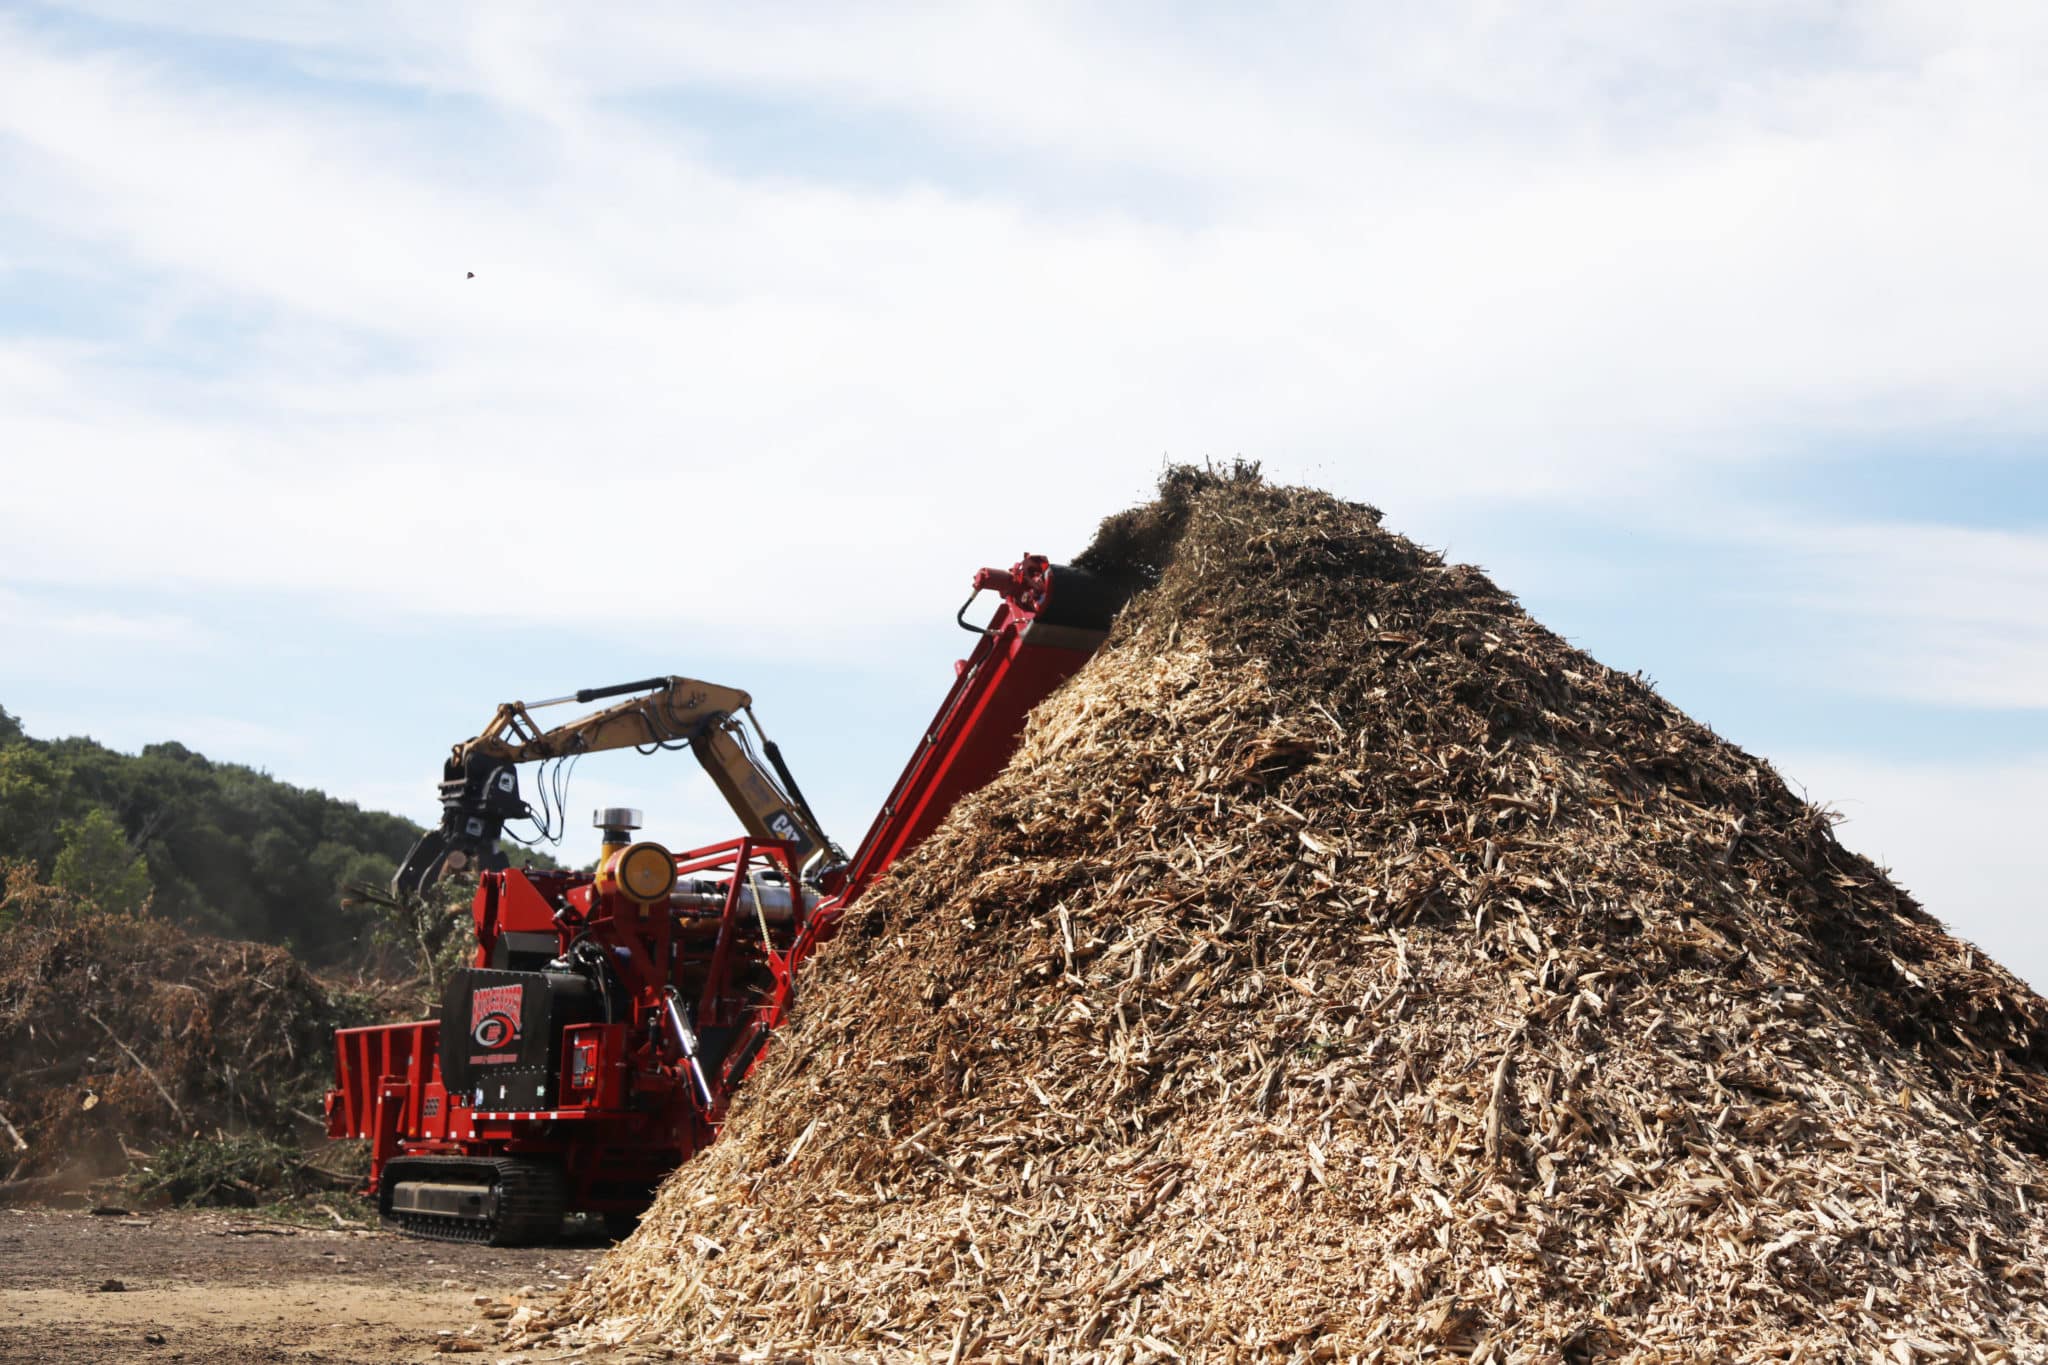 Rotochopper equipment being used to recycle wood waste